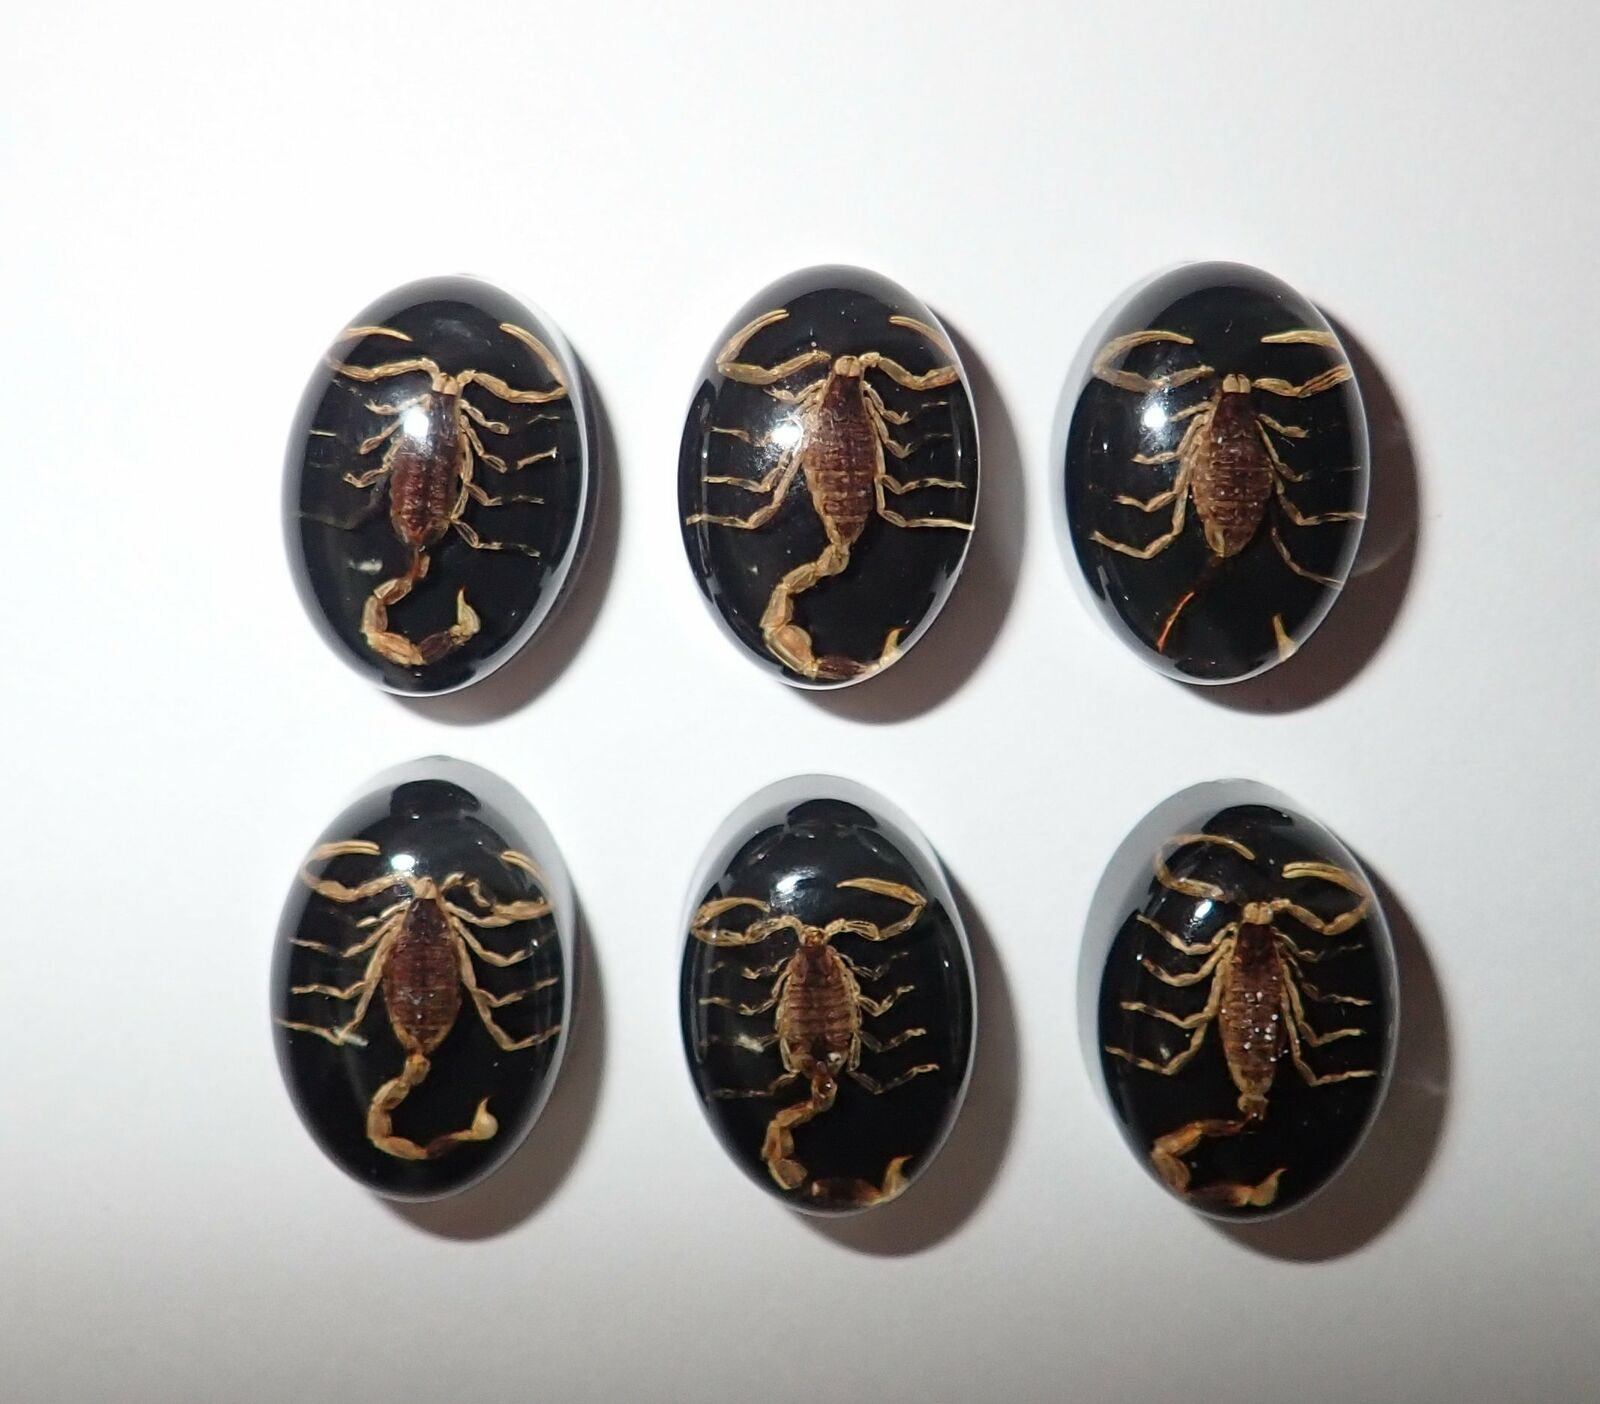 Insect Cabochon Golden Scorpion Oval 12x18 Mm On Black Bottom 100 Pieces Lot